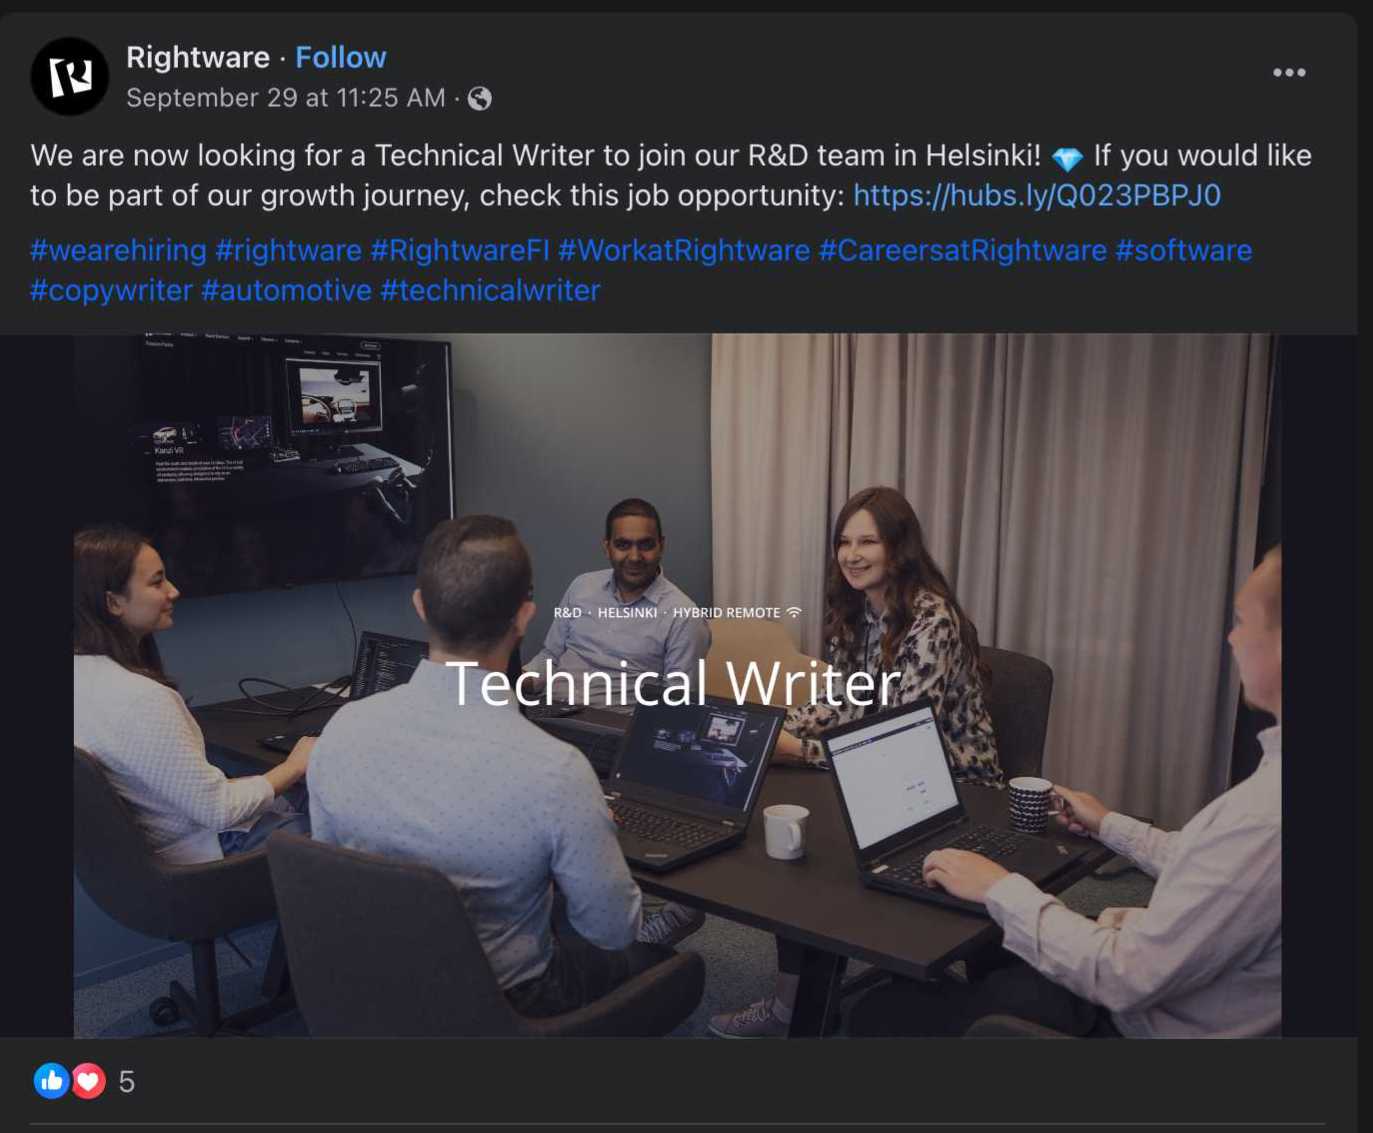 An example of a job ad for a tecnical writer by a SaaS company.